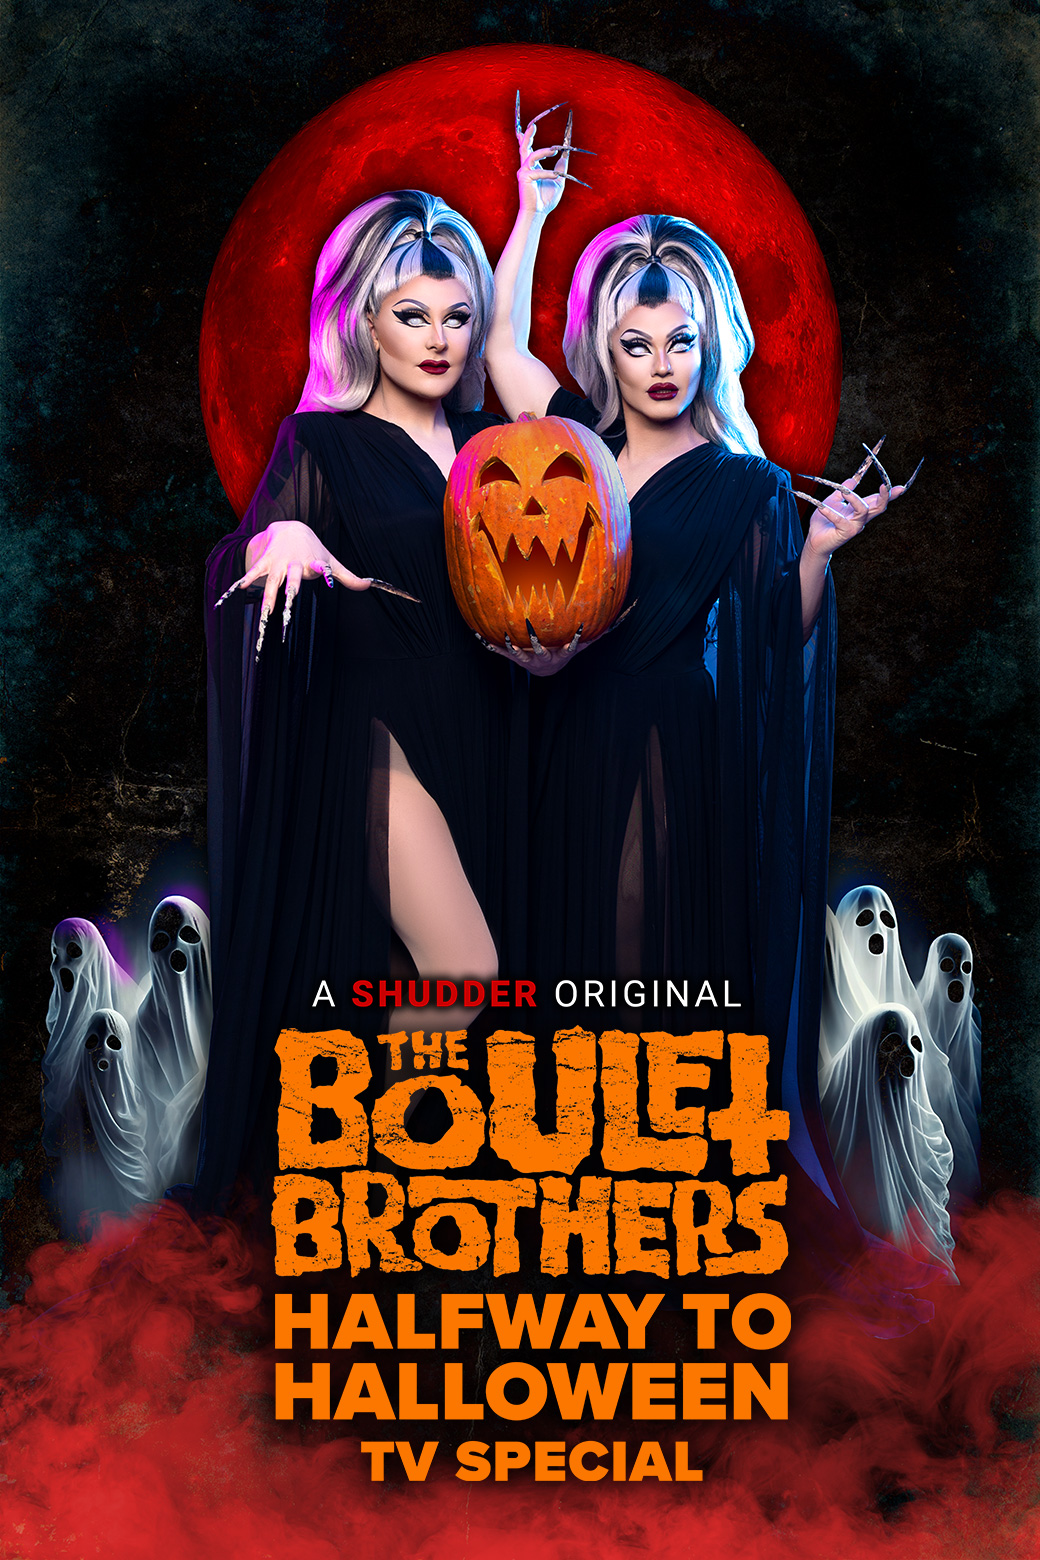 series_amcn_FTP66548_boulet-brothers-halfway-to-halloween-special__img_poster_2x3